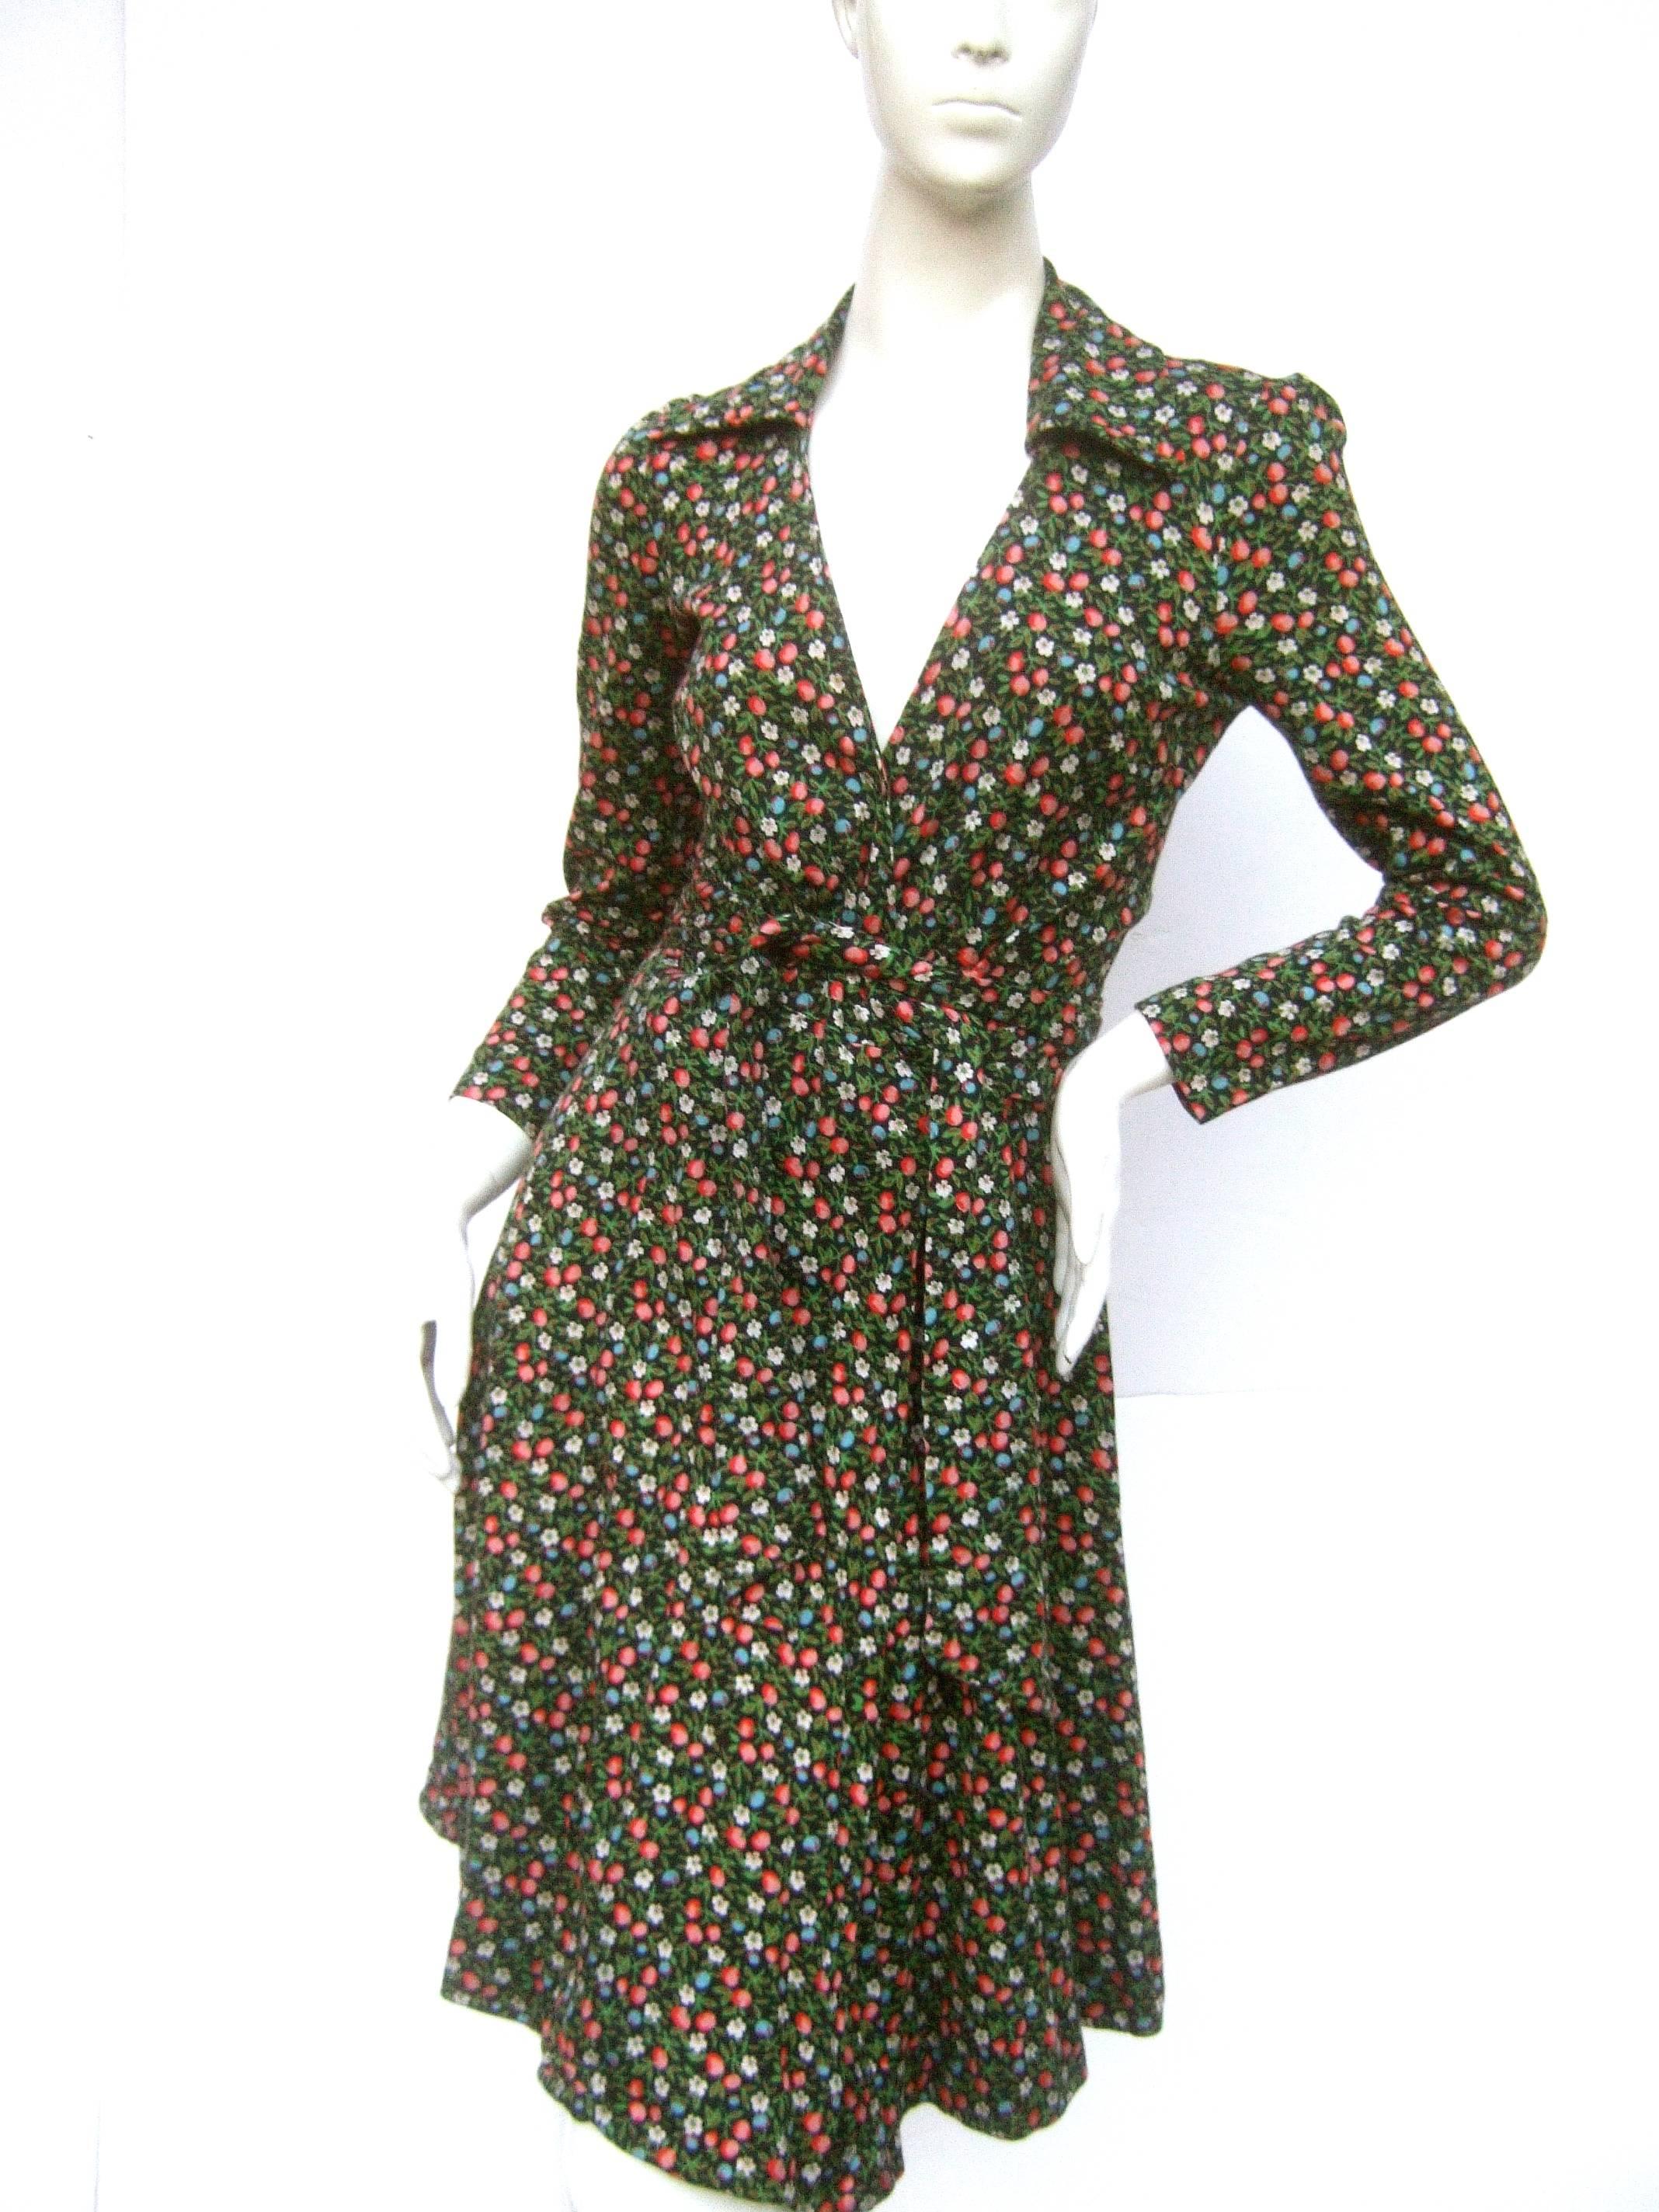 Diane von Furstenberg Iconic floral print Italian wrap dress c 1970s
The stylish wrap dress is illustrated with a field of delicate 
flower blooms; illuminated against a black background 

Von Furstenberg's clingy wrap dresses were the it